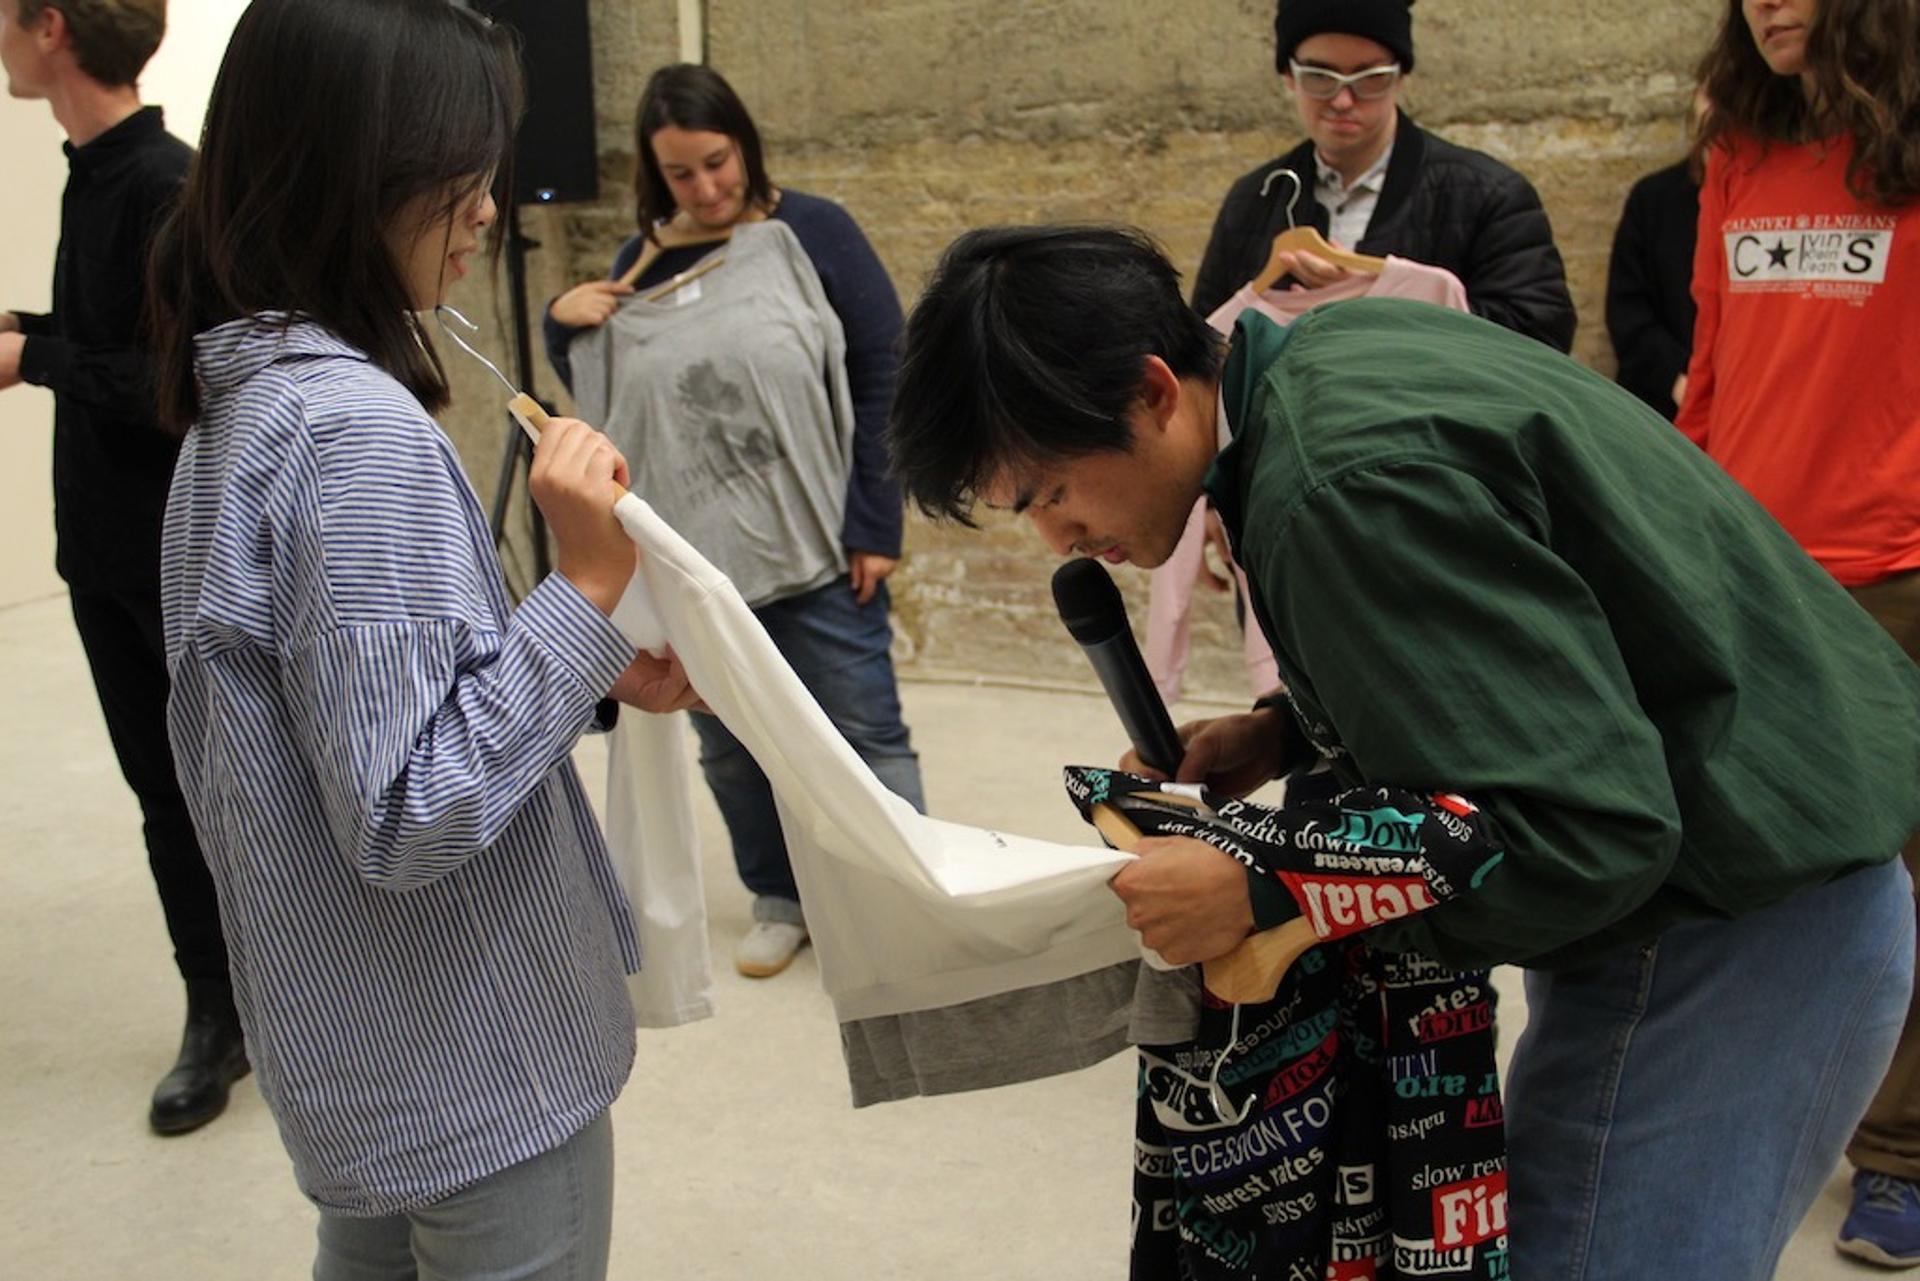 In "Take the unpredictable trouble: a group poetry reading," audience members activated select items from the Shanzhai Lyric archive in a group poetry reading. Presented as part of the “Loud Bodies” program at Goldsmiths Centre for Contemporary Art, London, 2018. Photo by Lxo Cohen. Courtesy Shanzhai Lyric.